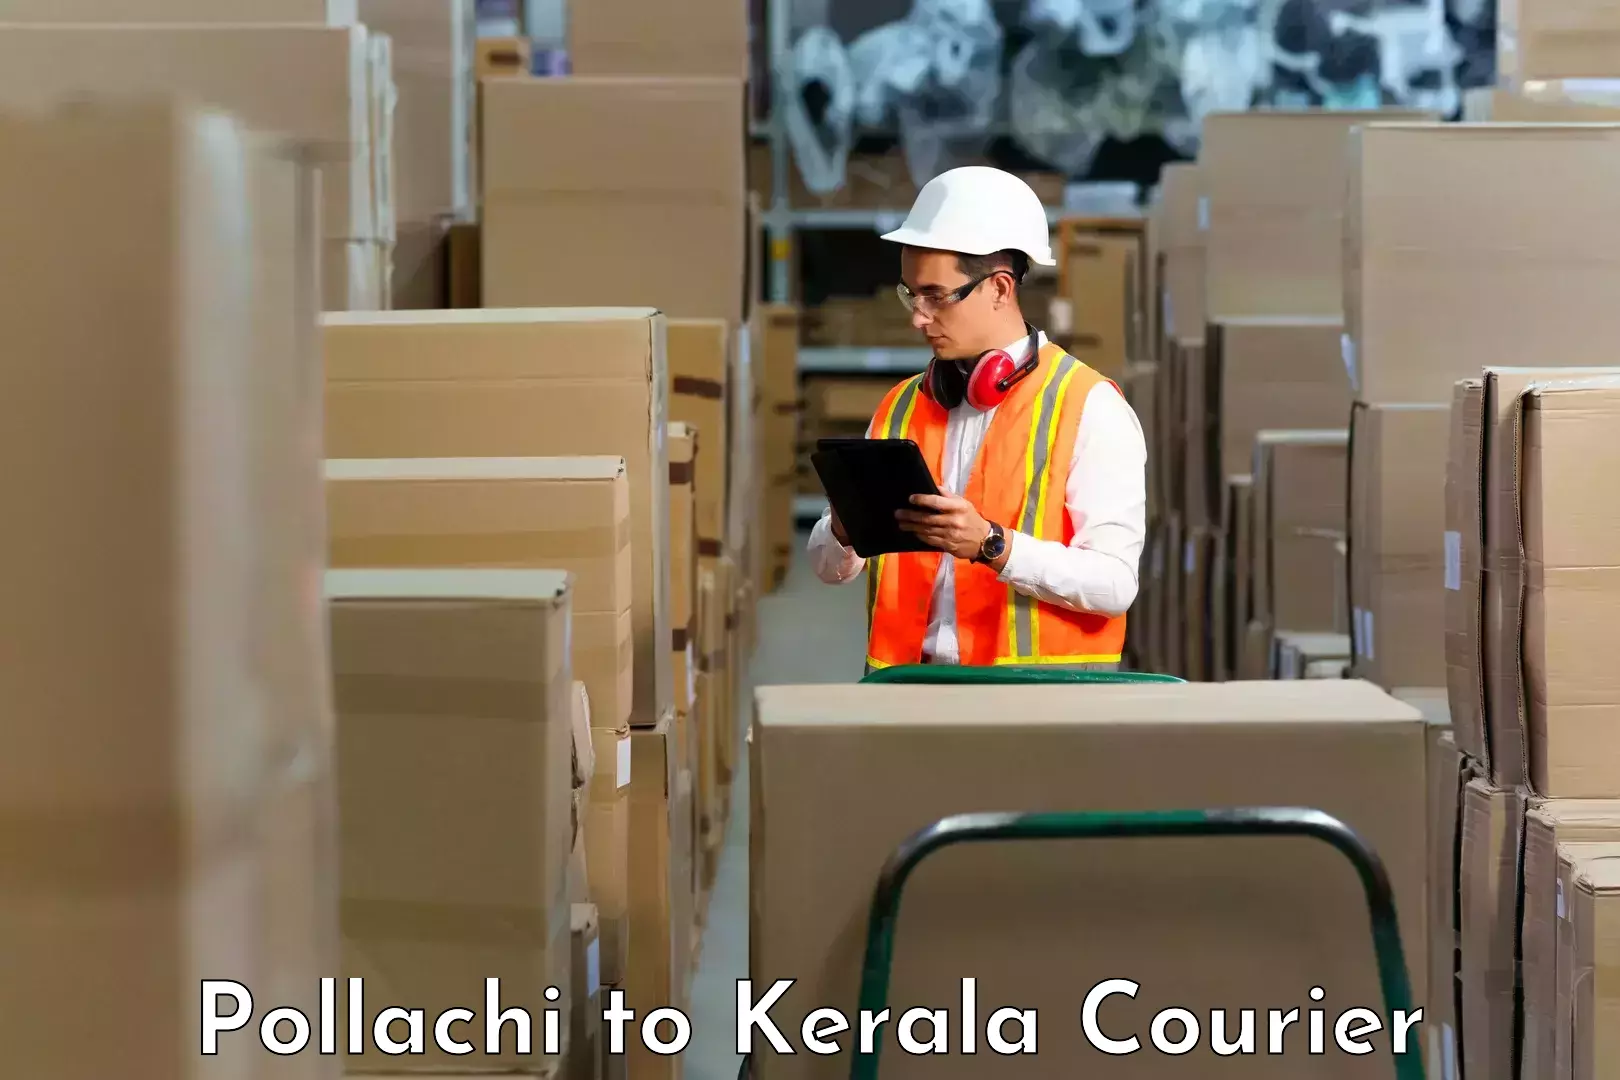 Courier service comparison in Pollachi to Kayamkulam